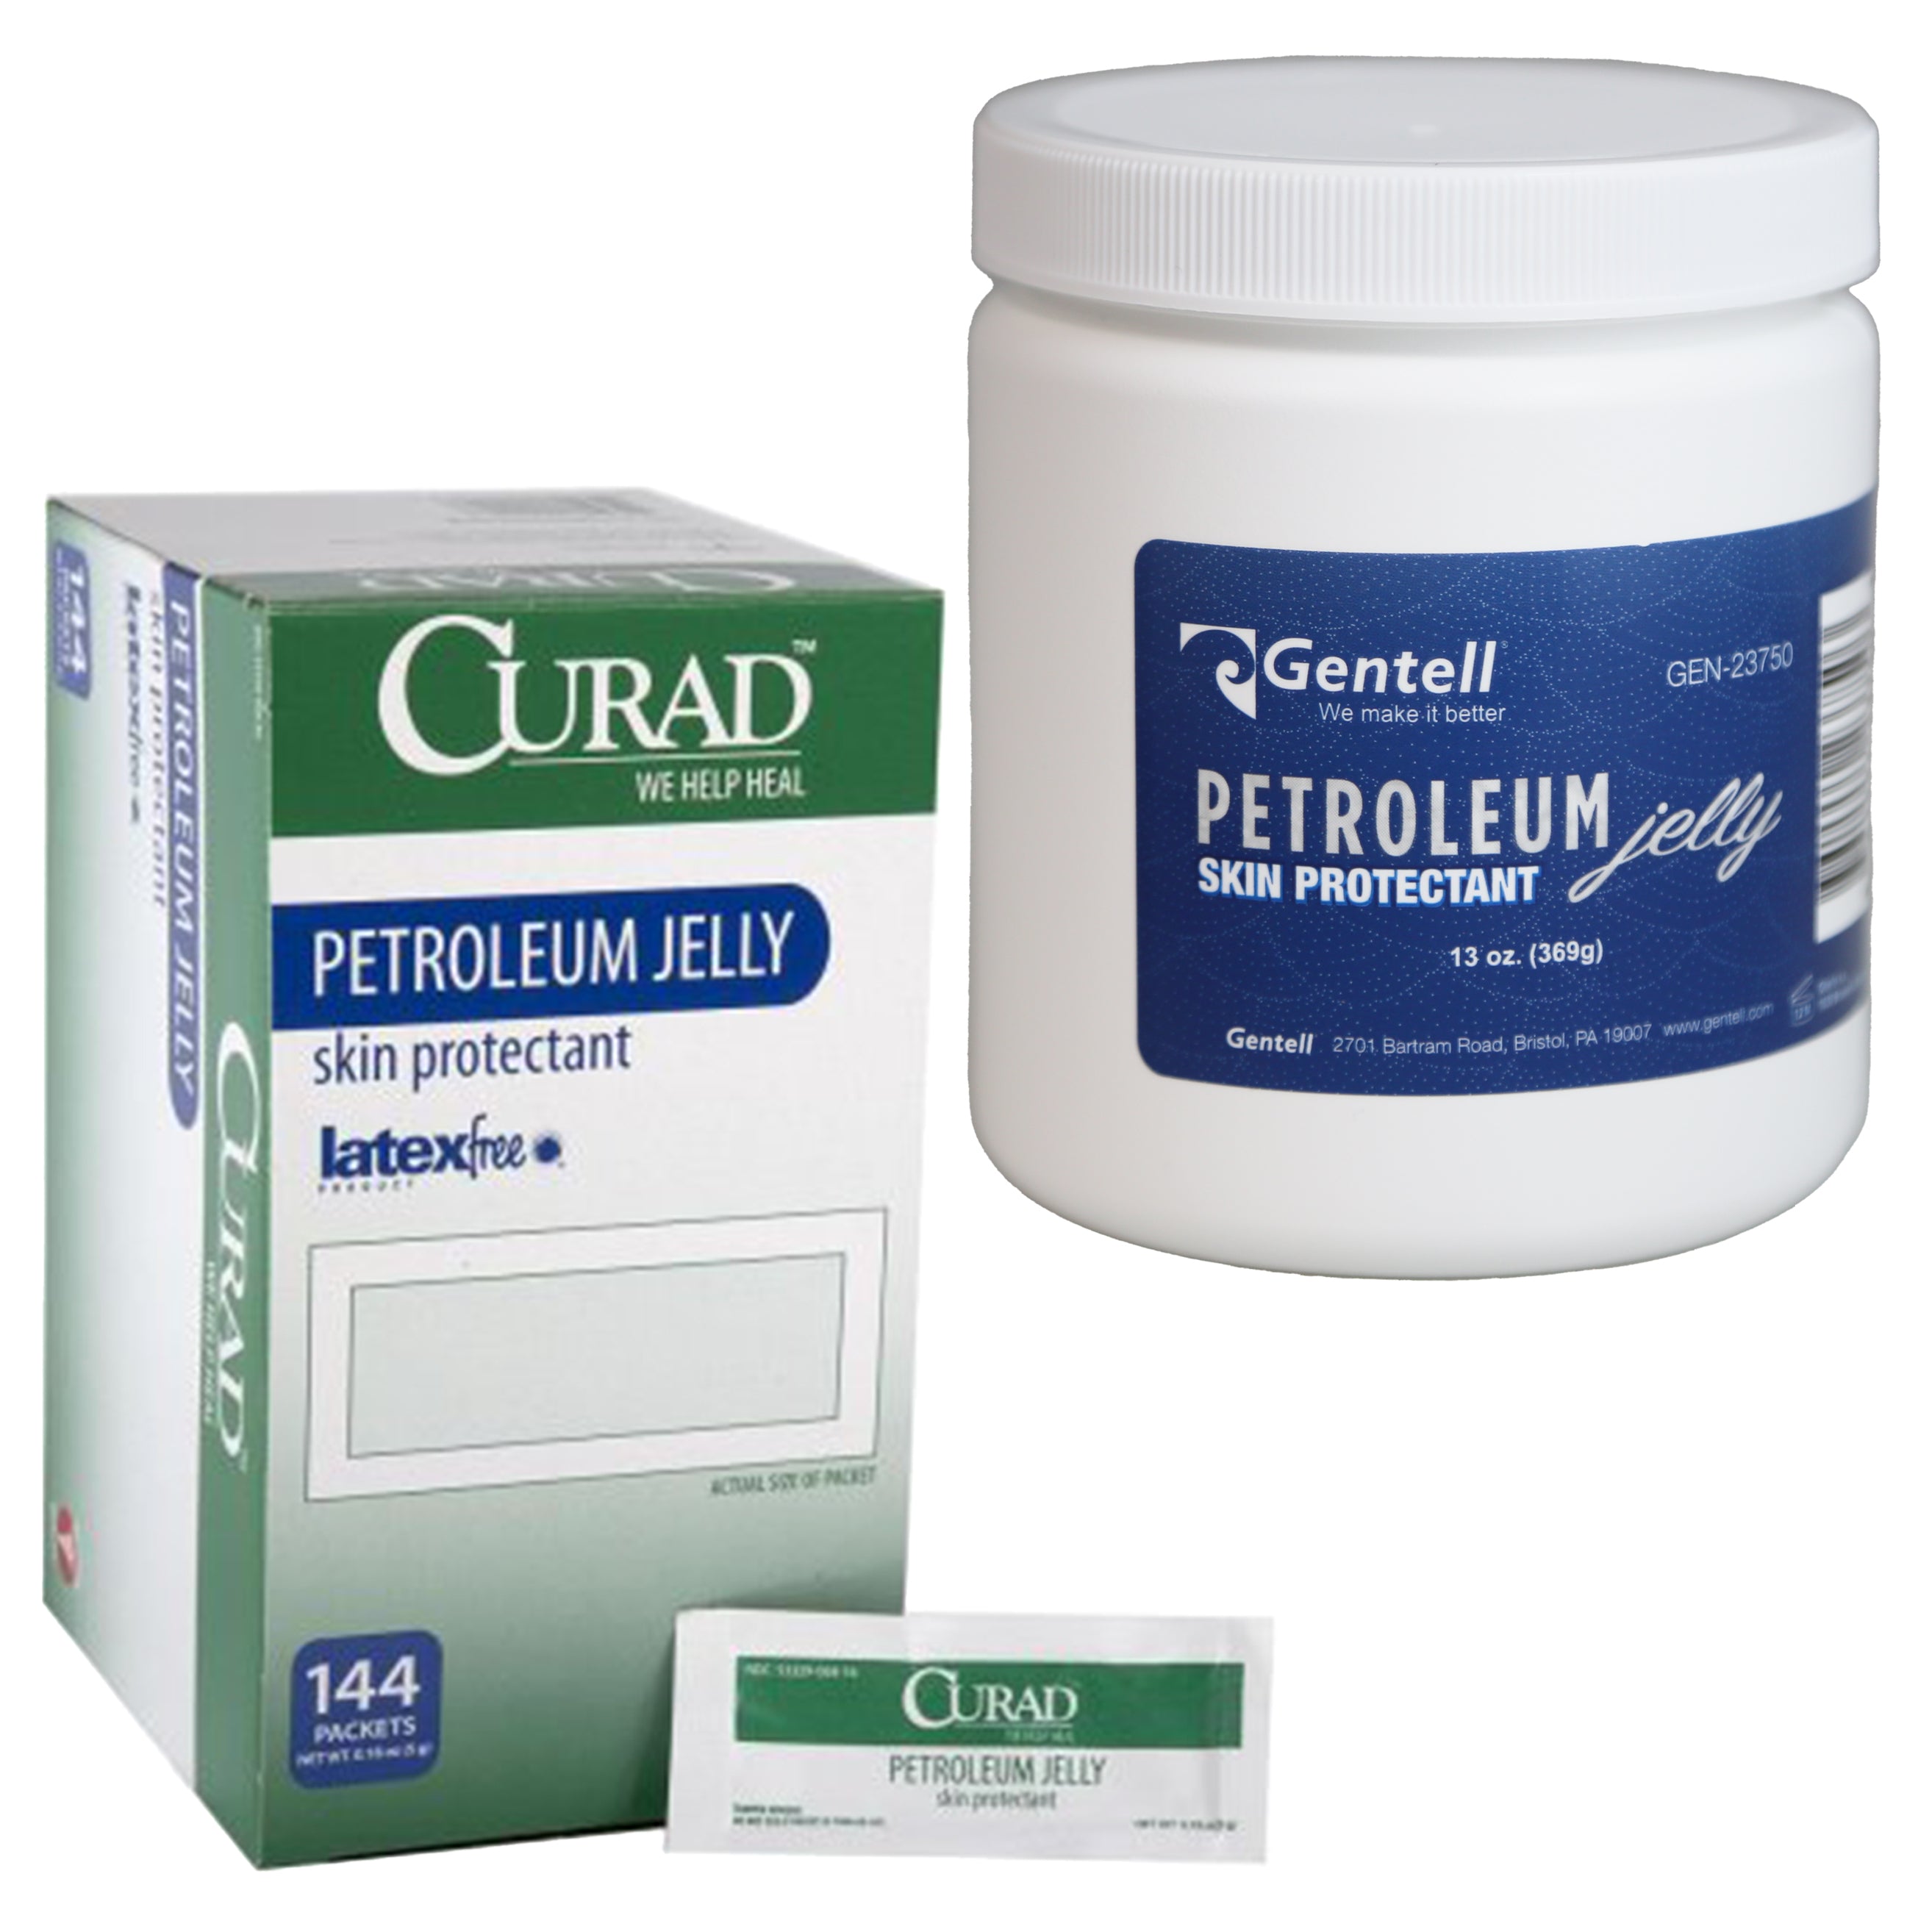 Petroleum Jelly Products